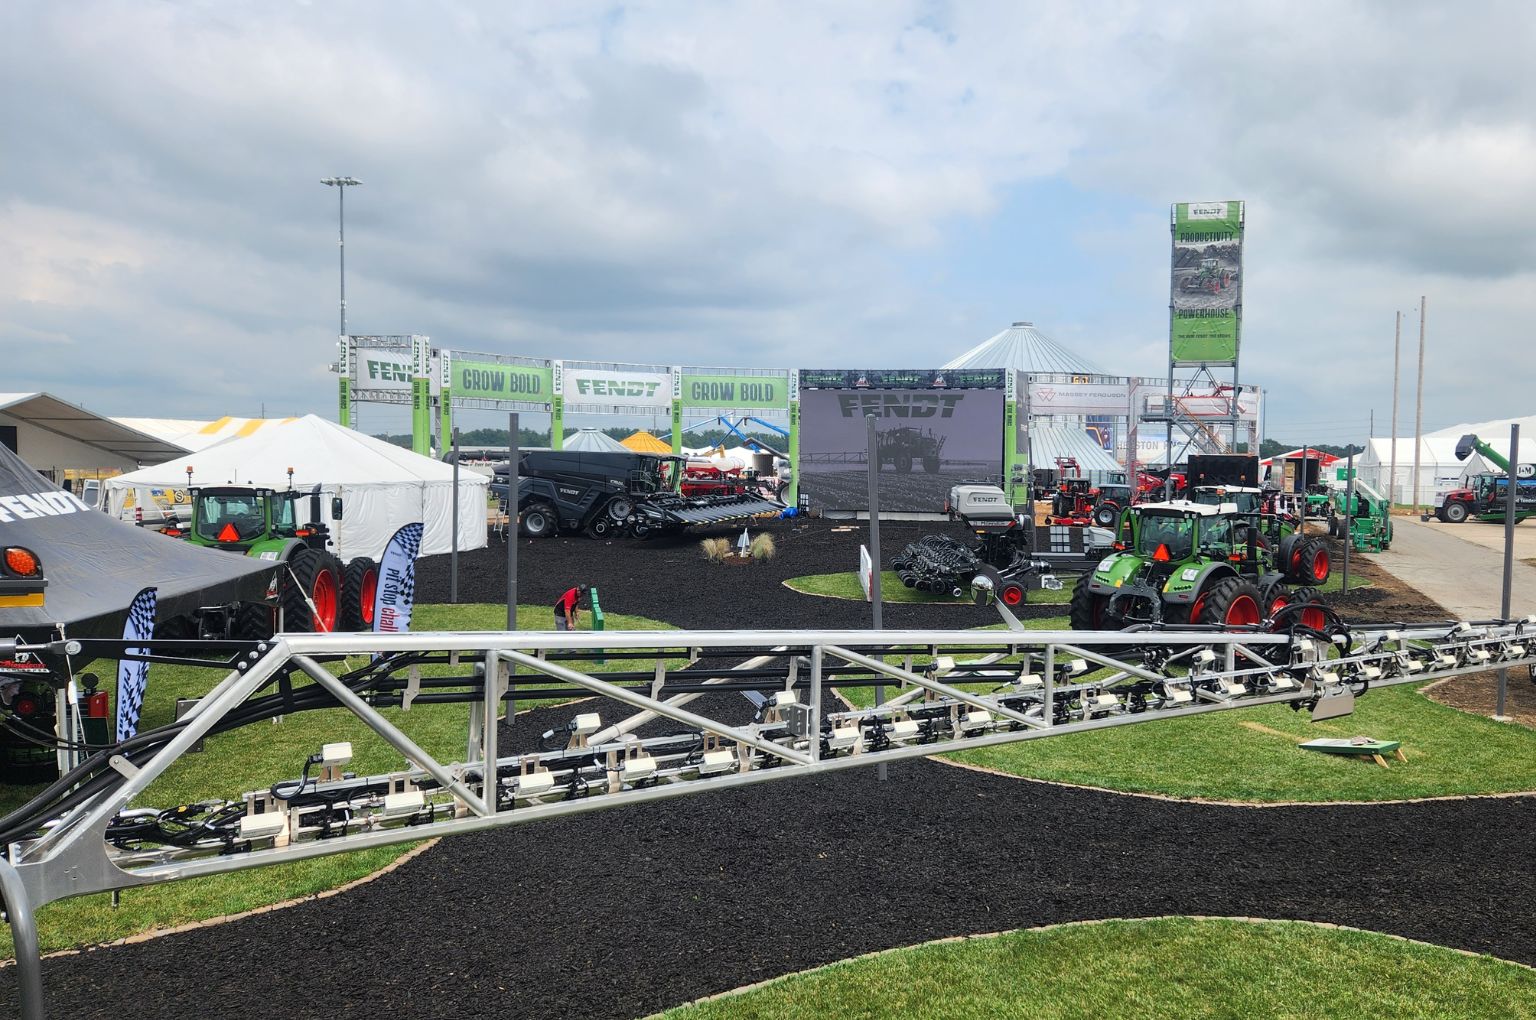 MAGIE award for Fendt Rogator 900 and One Smart Spray